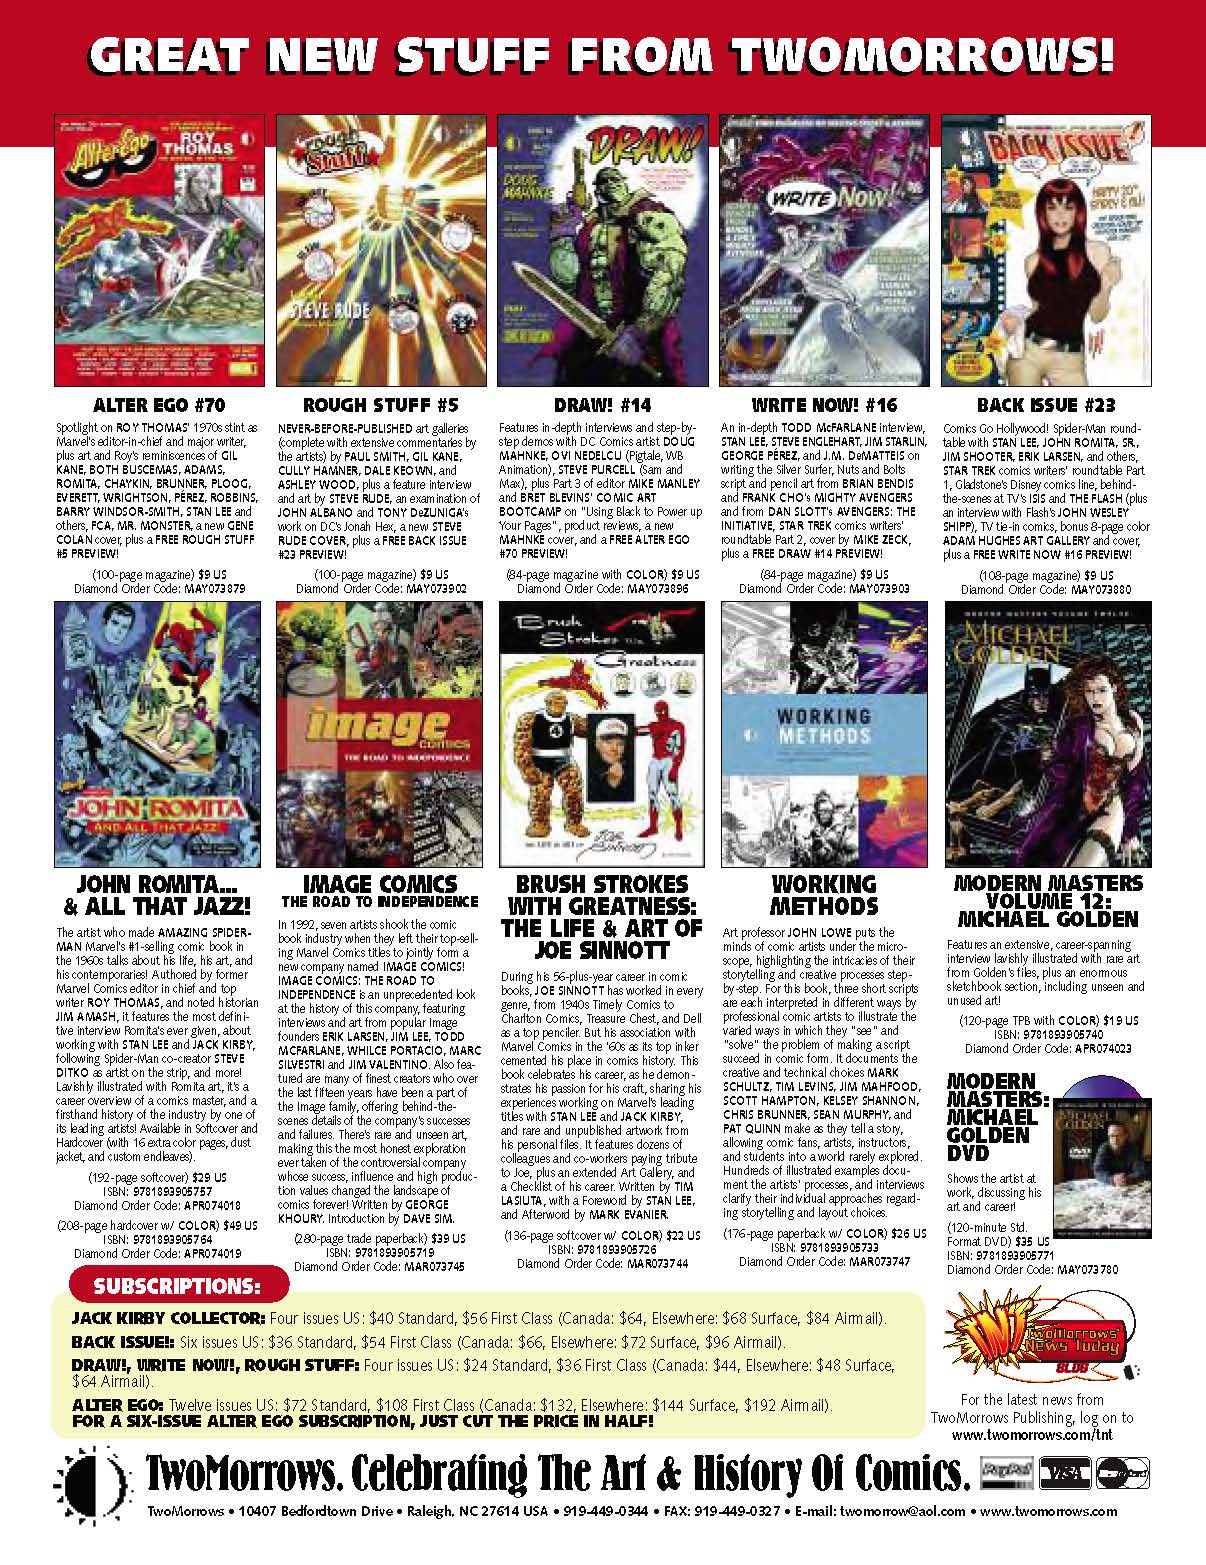 Read online Back Issue comic -  Issue #21 - 83